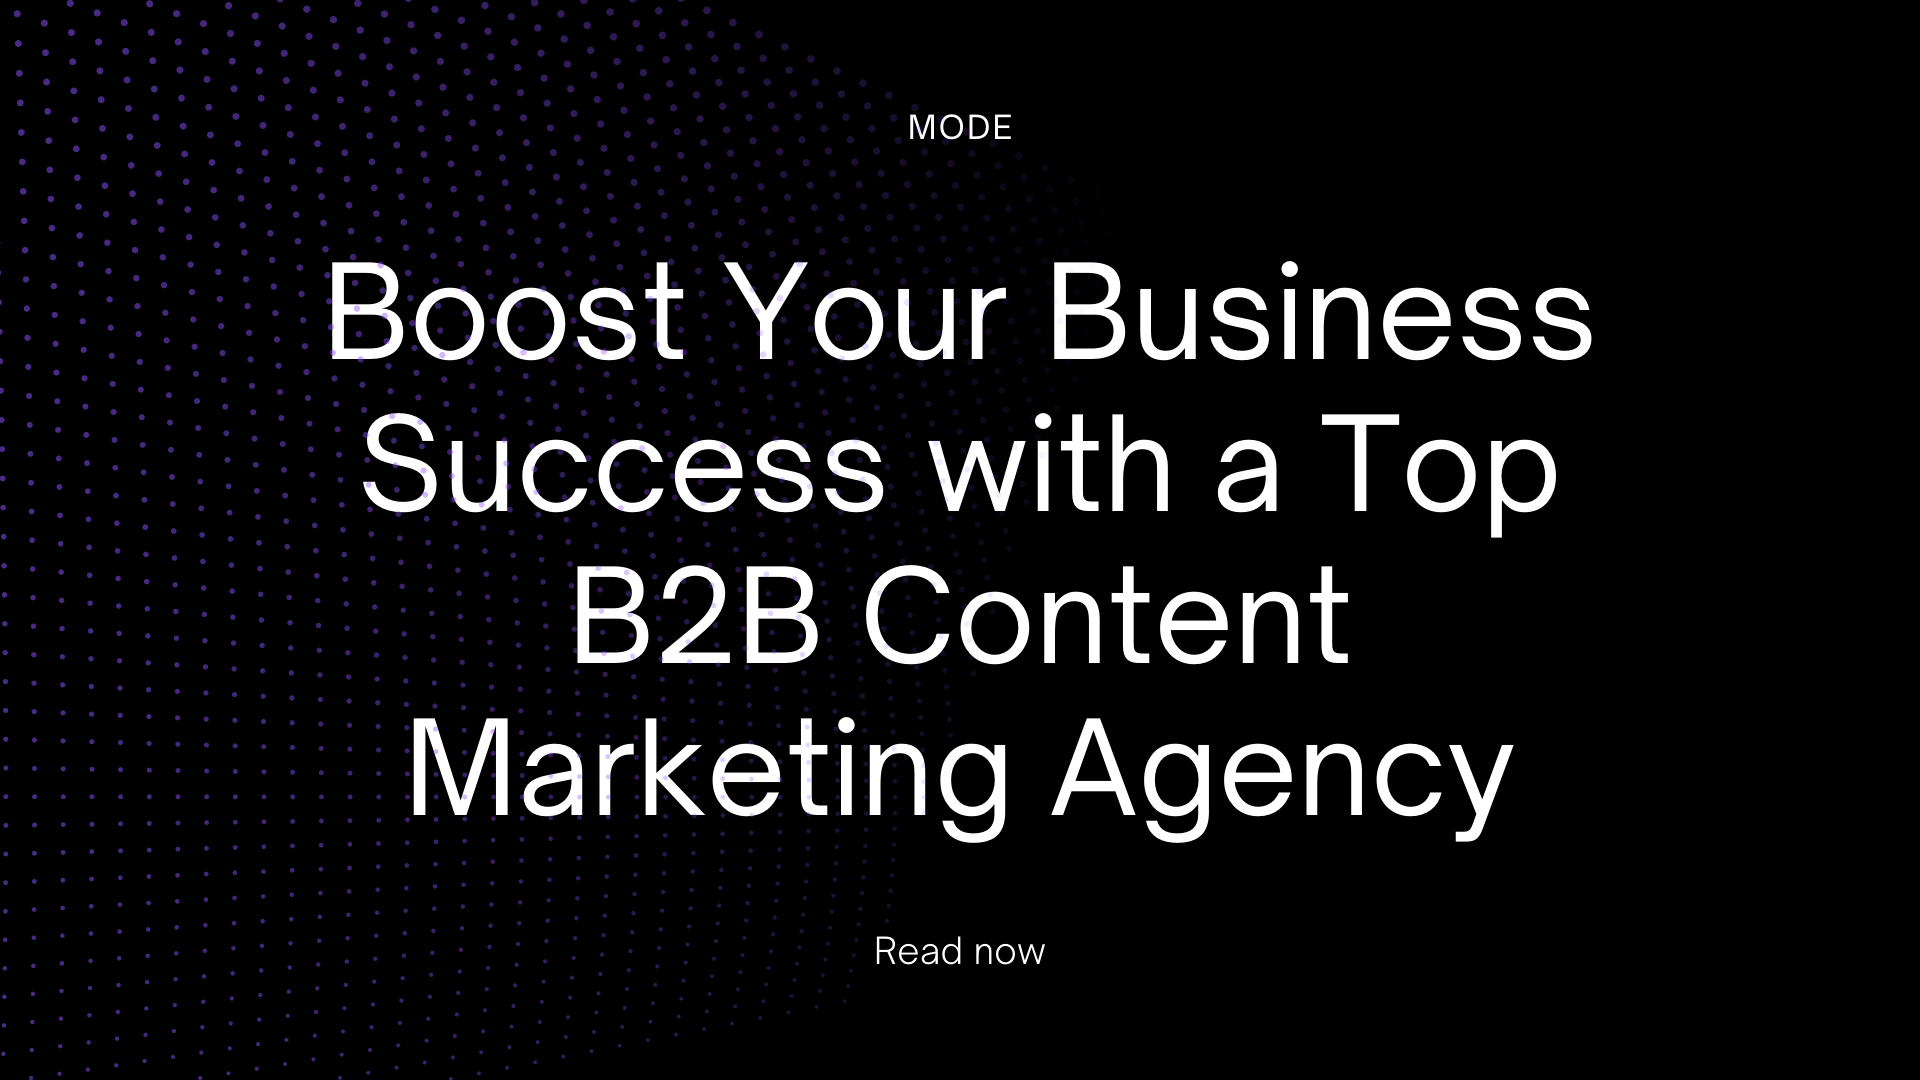 Boost Your Business Success with a Top B2B Content Marketing Agency